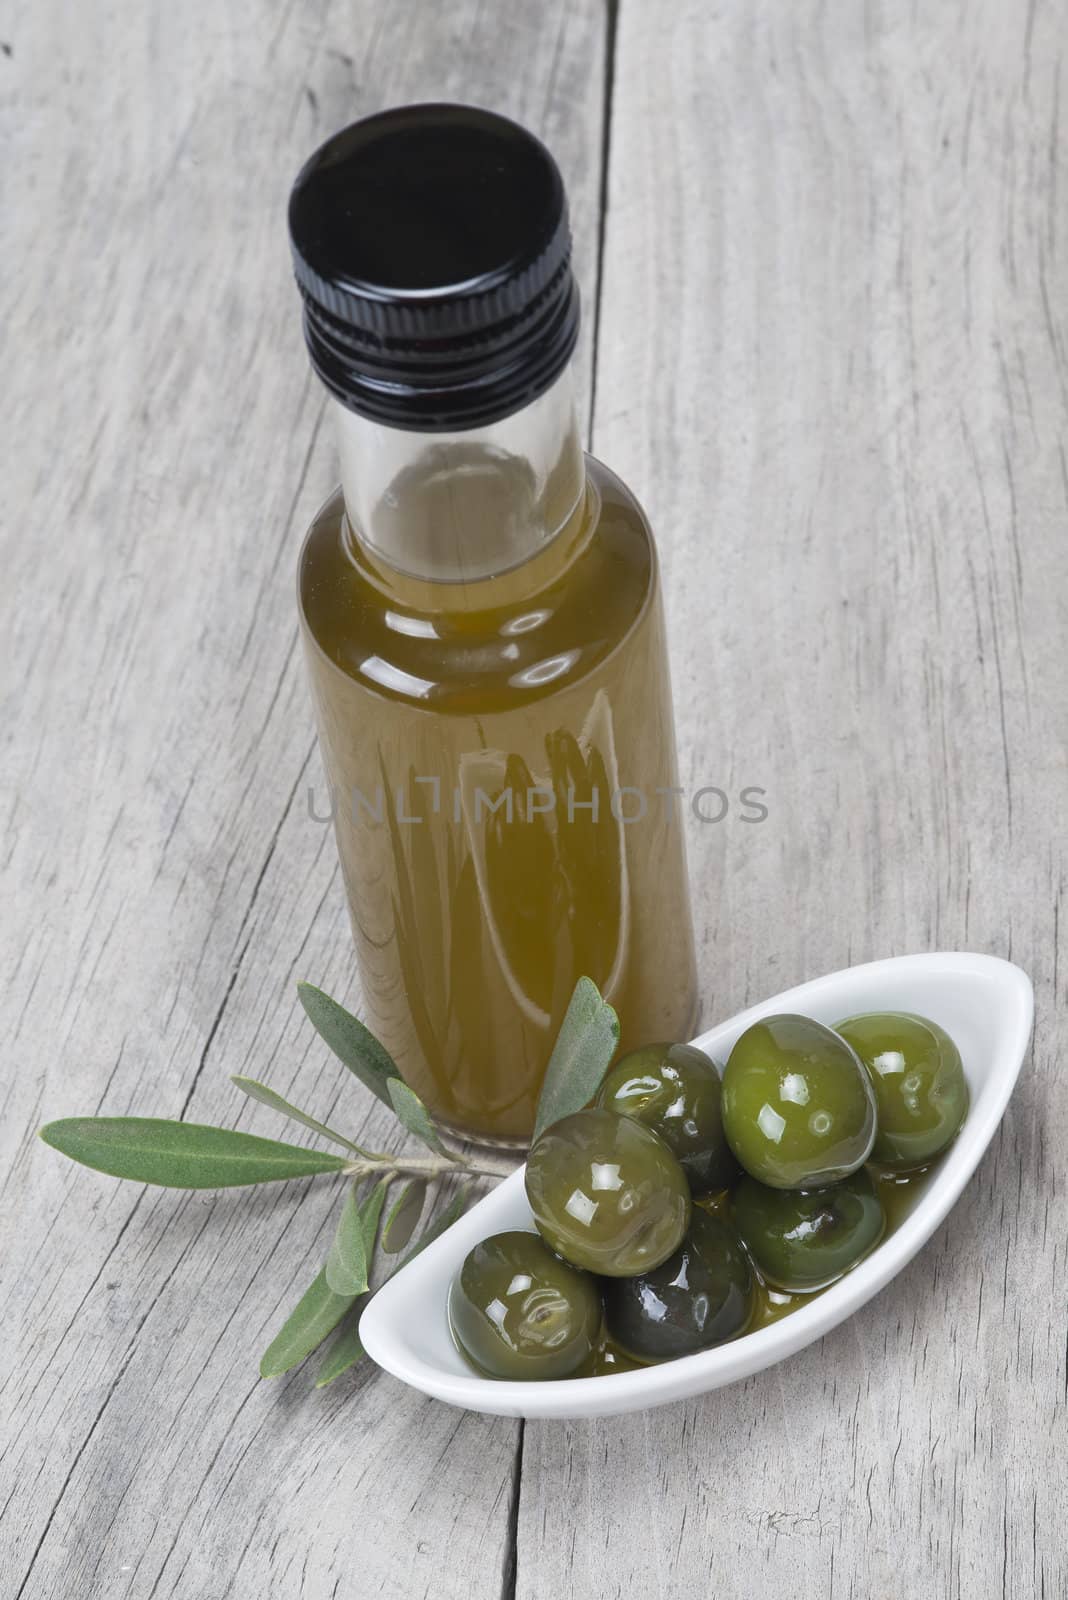 Olive oil bottle and some olives in a china spoon on a wooden surface